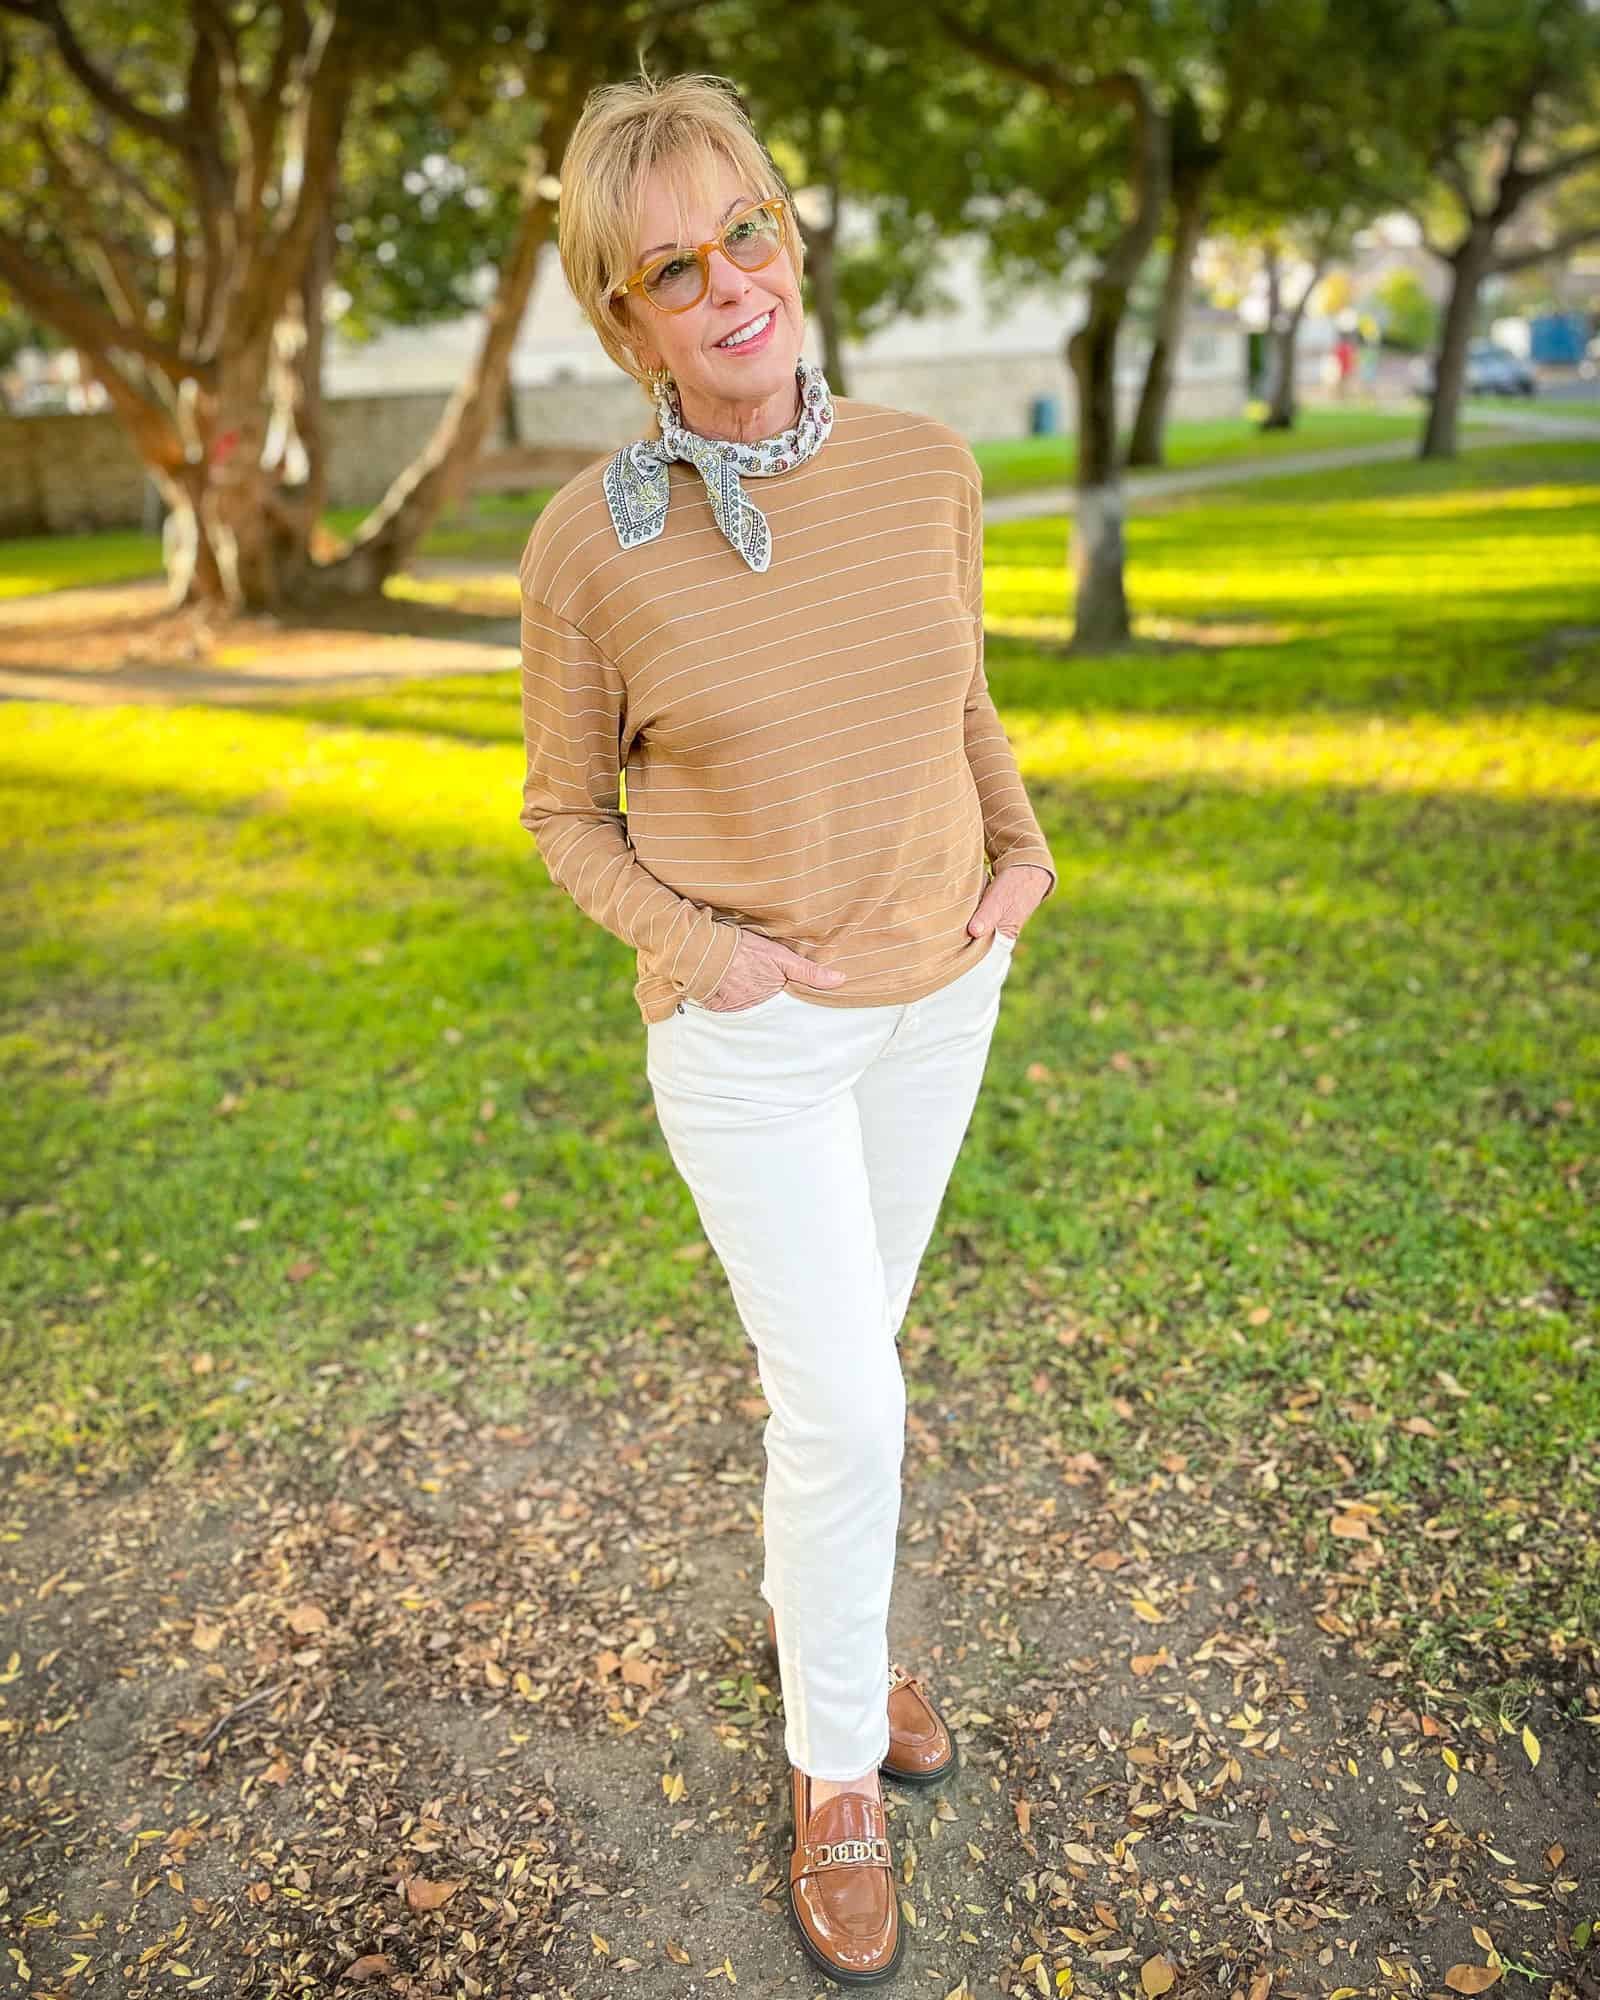 How to wear white jeans for fall - une femme d'un certain âge